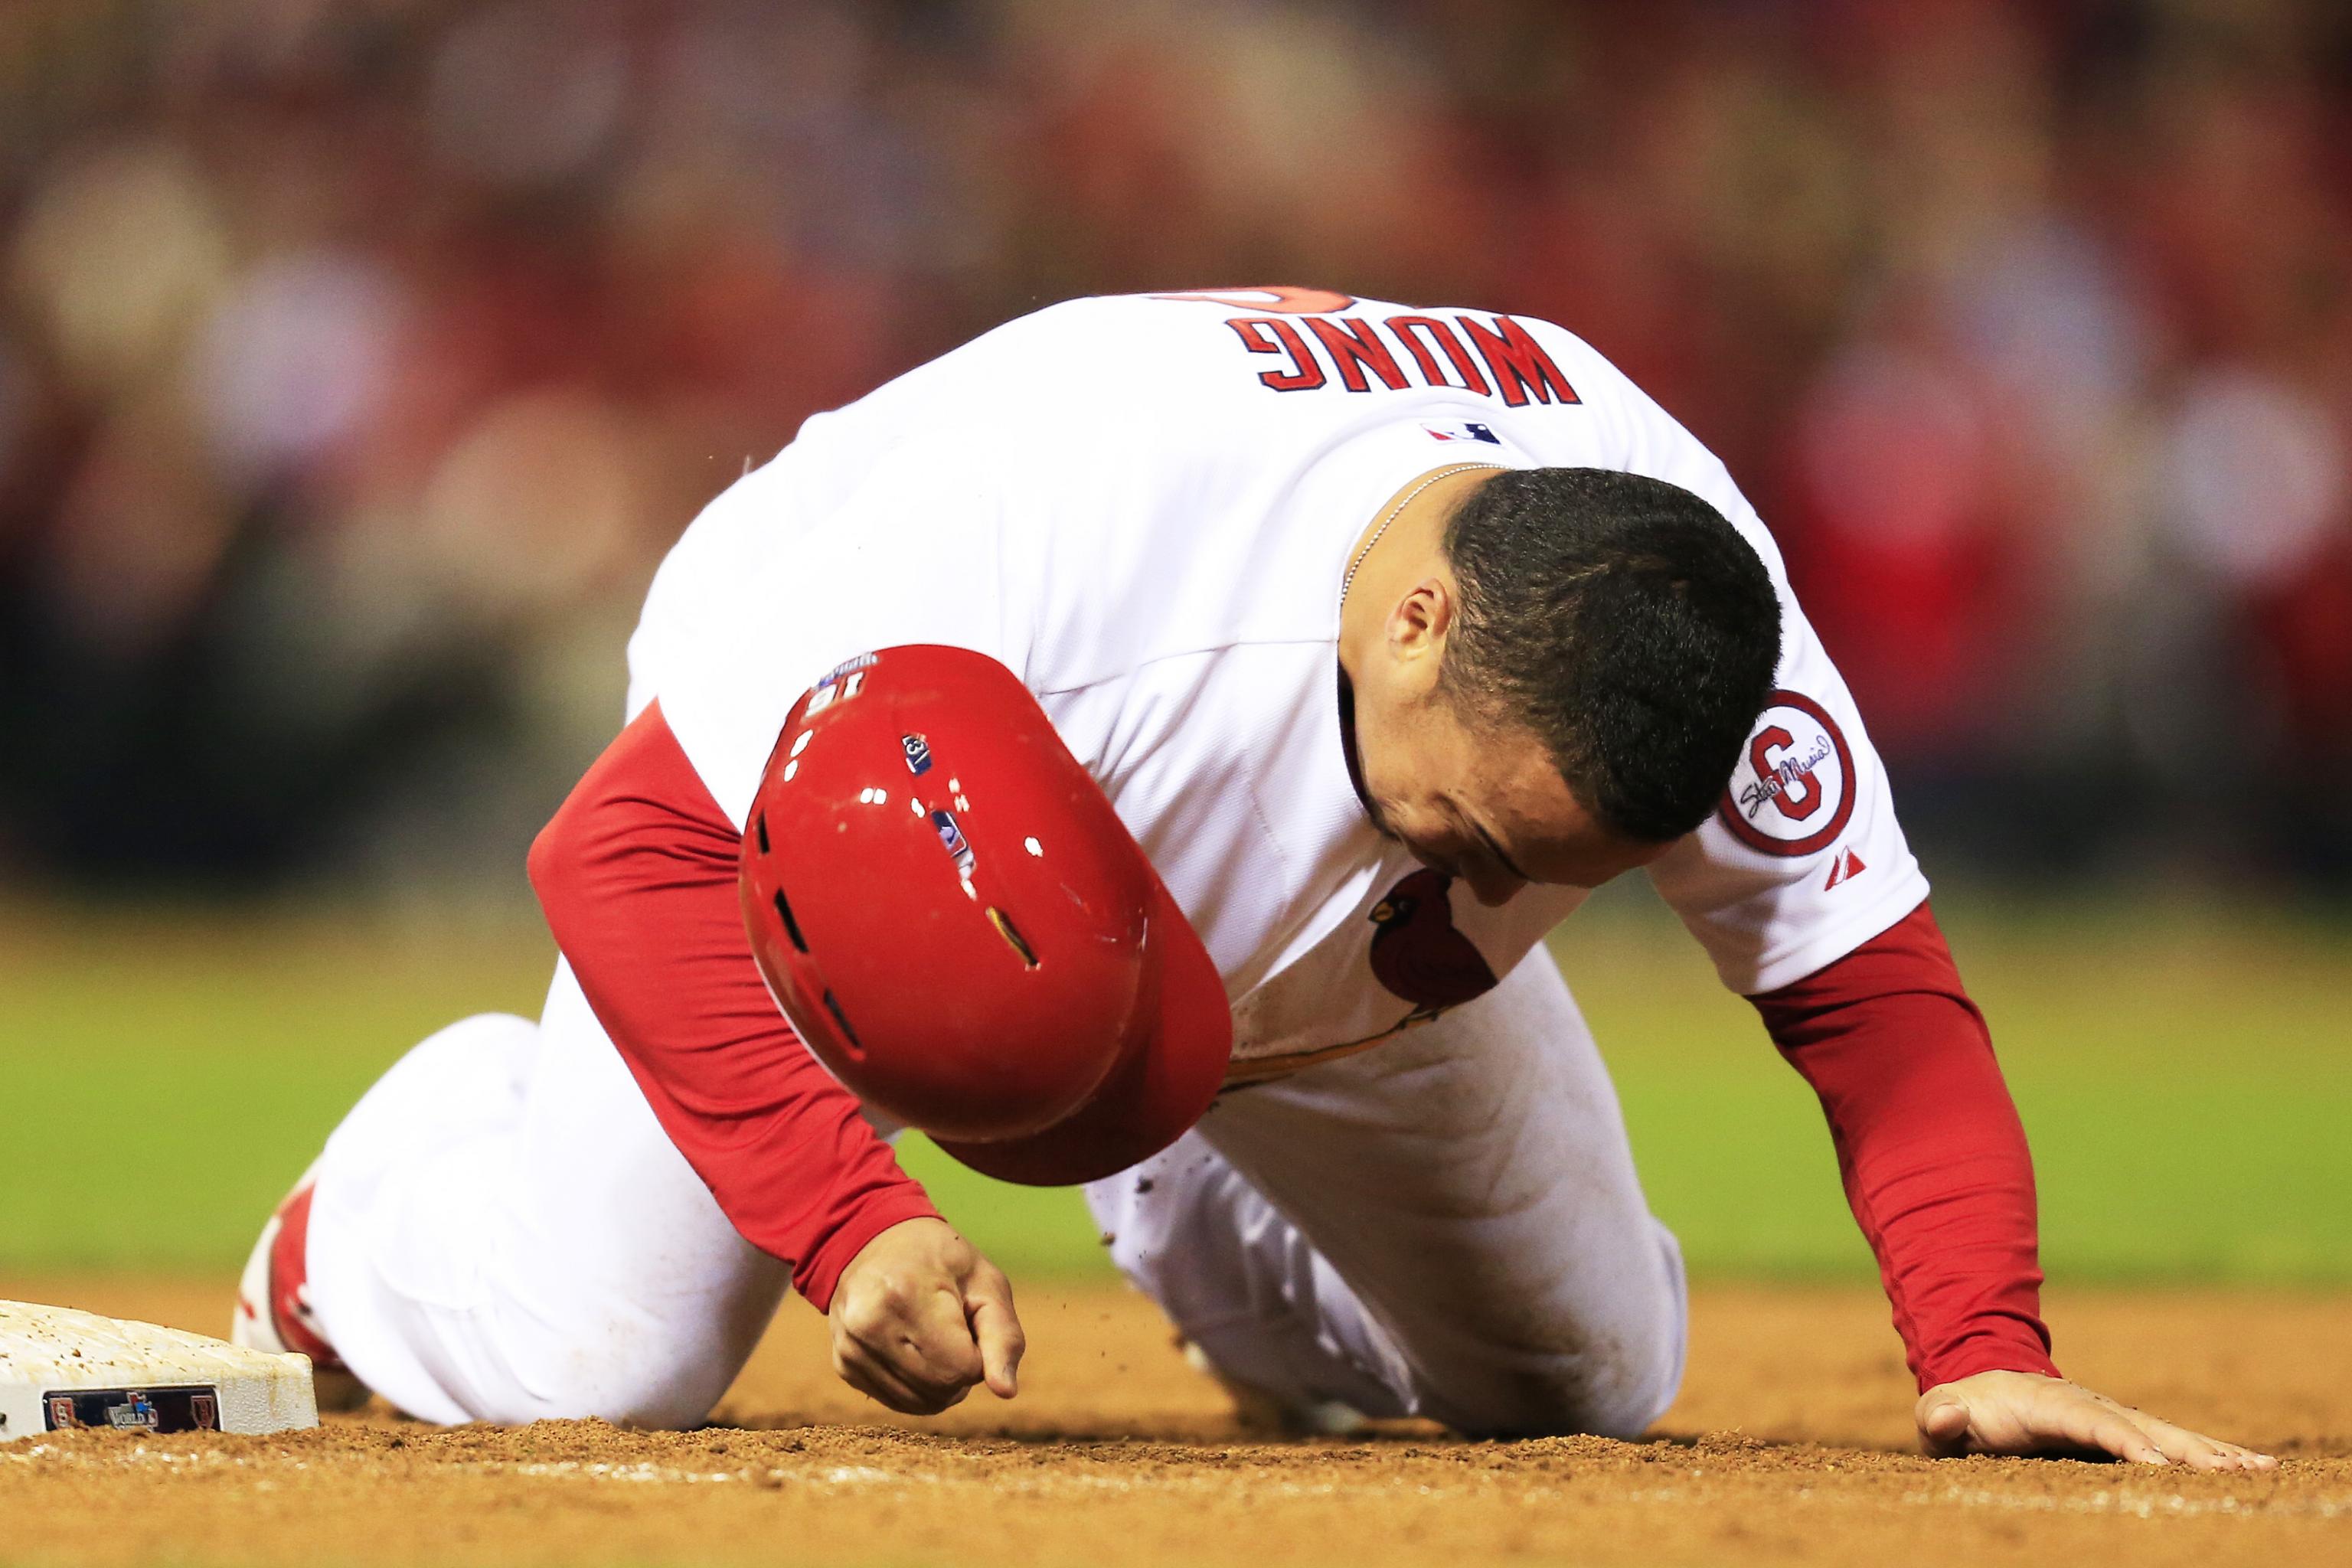 MLB - A lot of the pride and passion Kolten Wong plays with comes